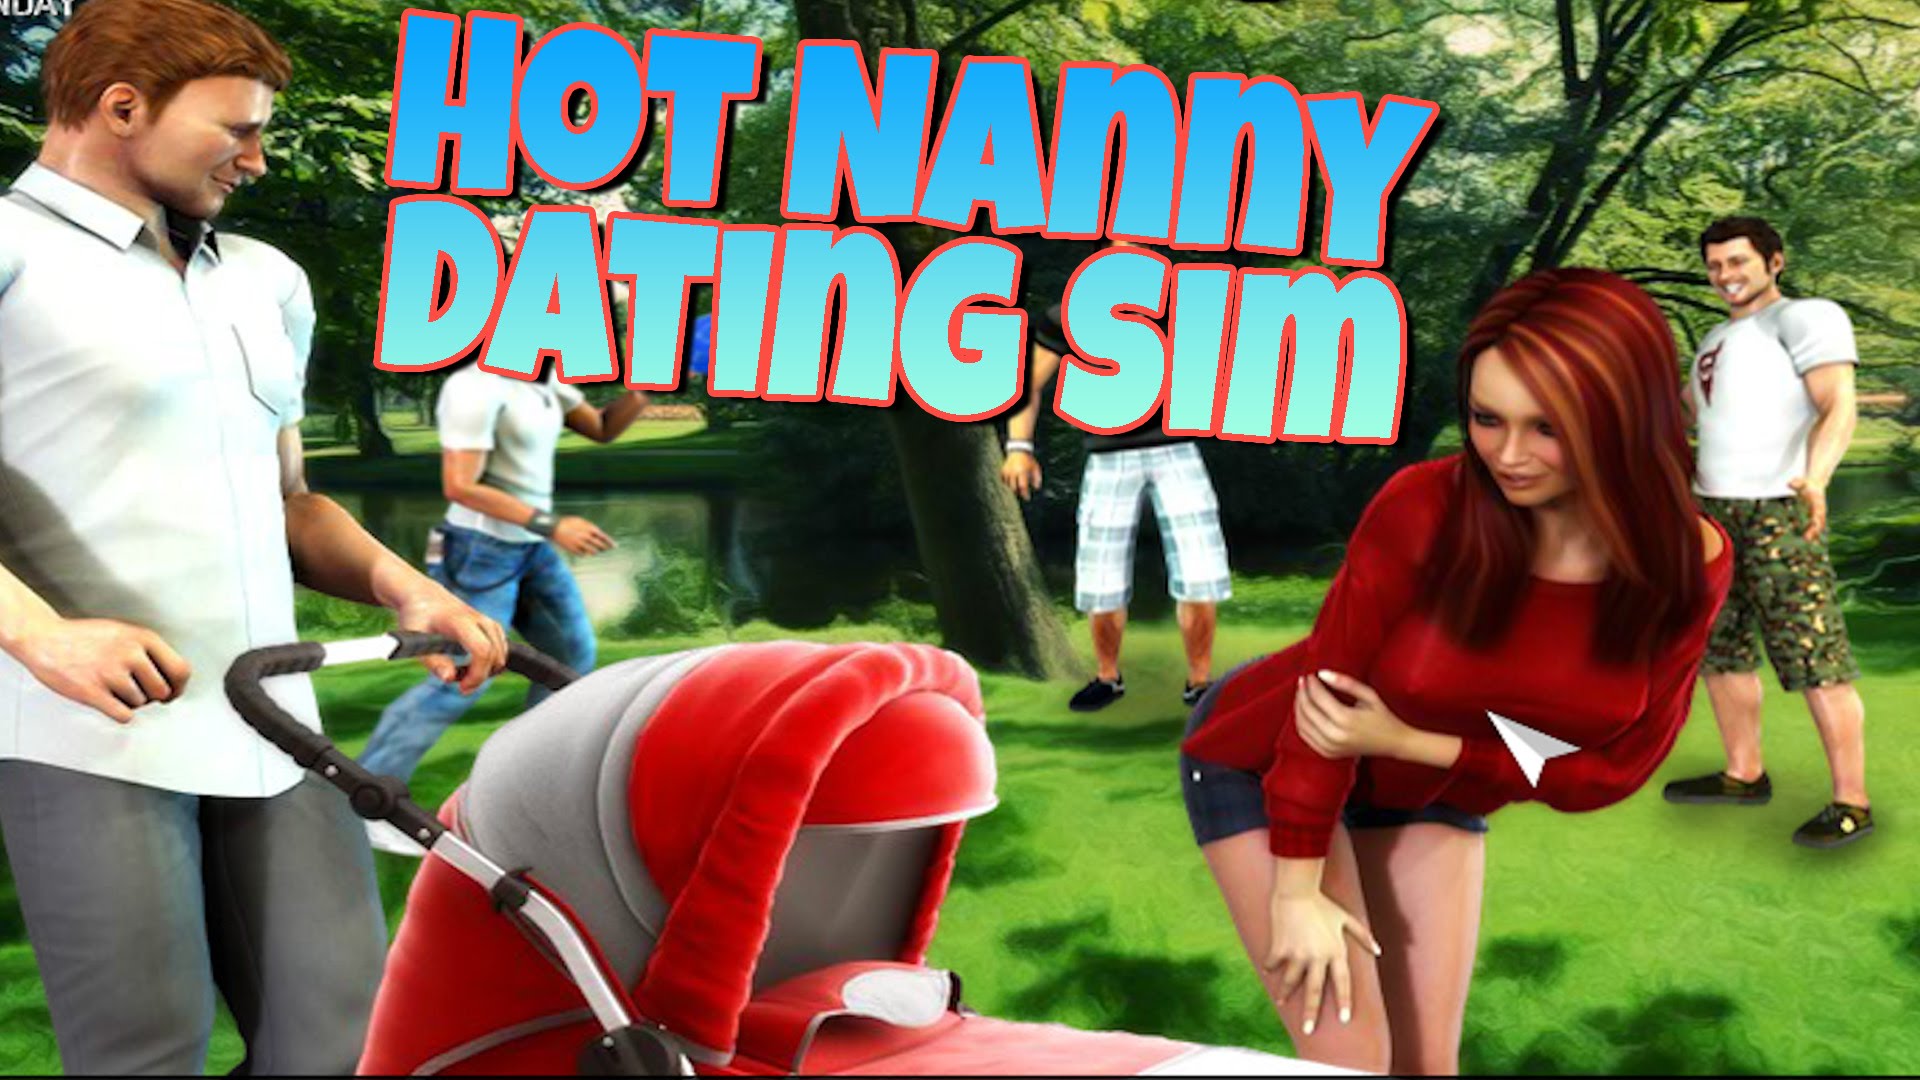 creeping on dat hot nanny adult dating sim censored youtube